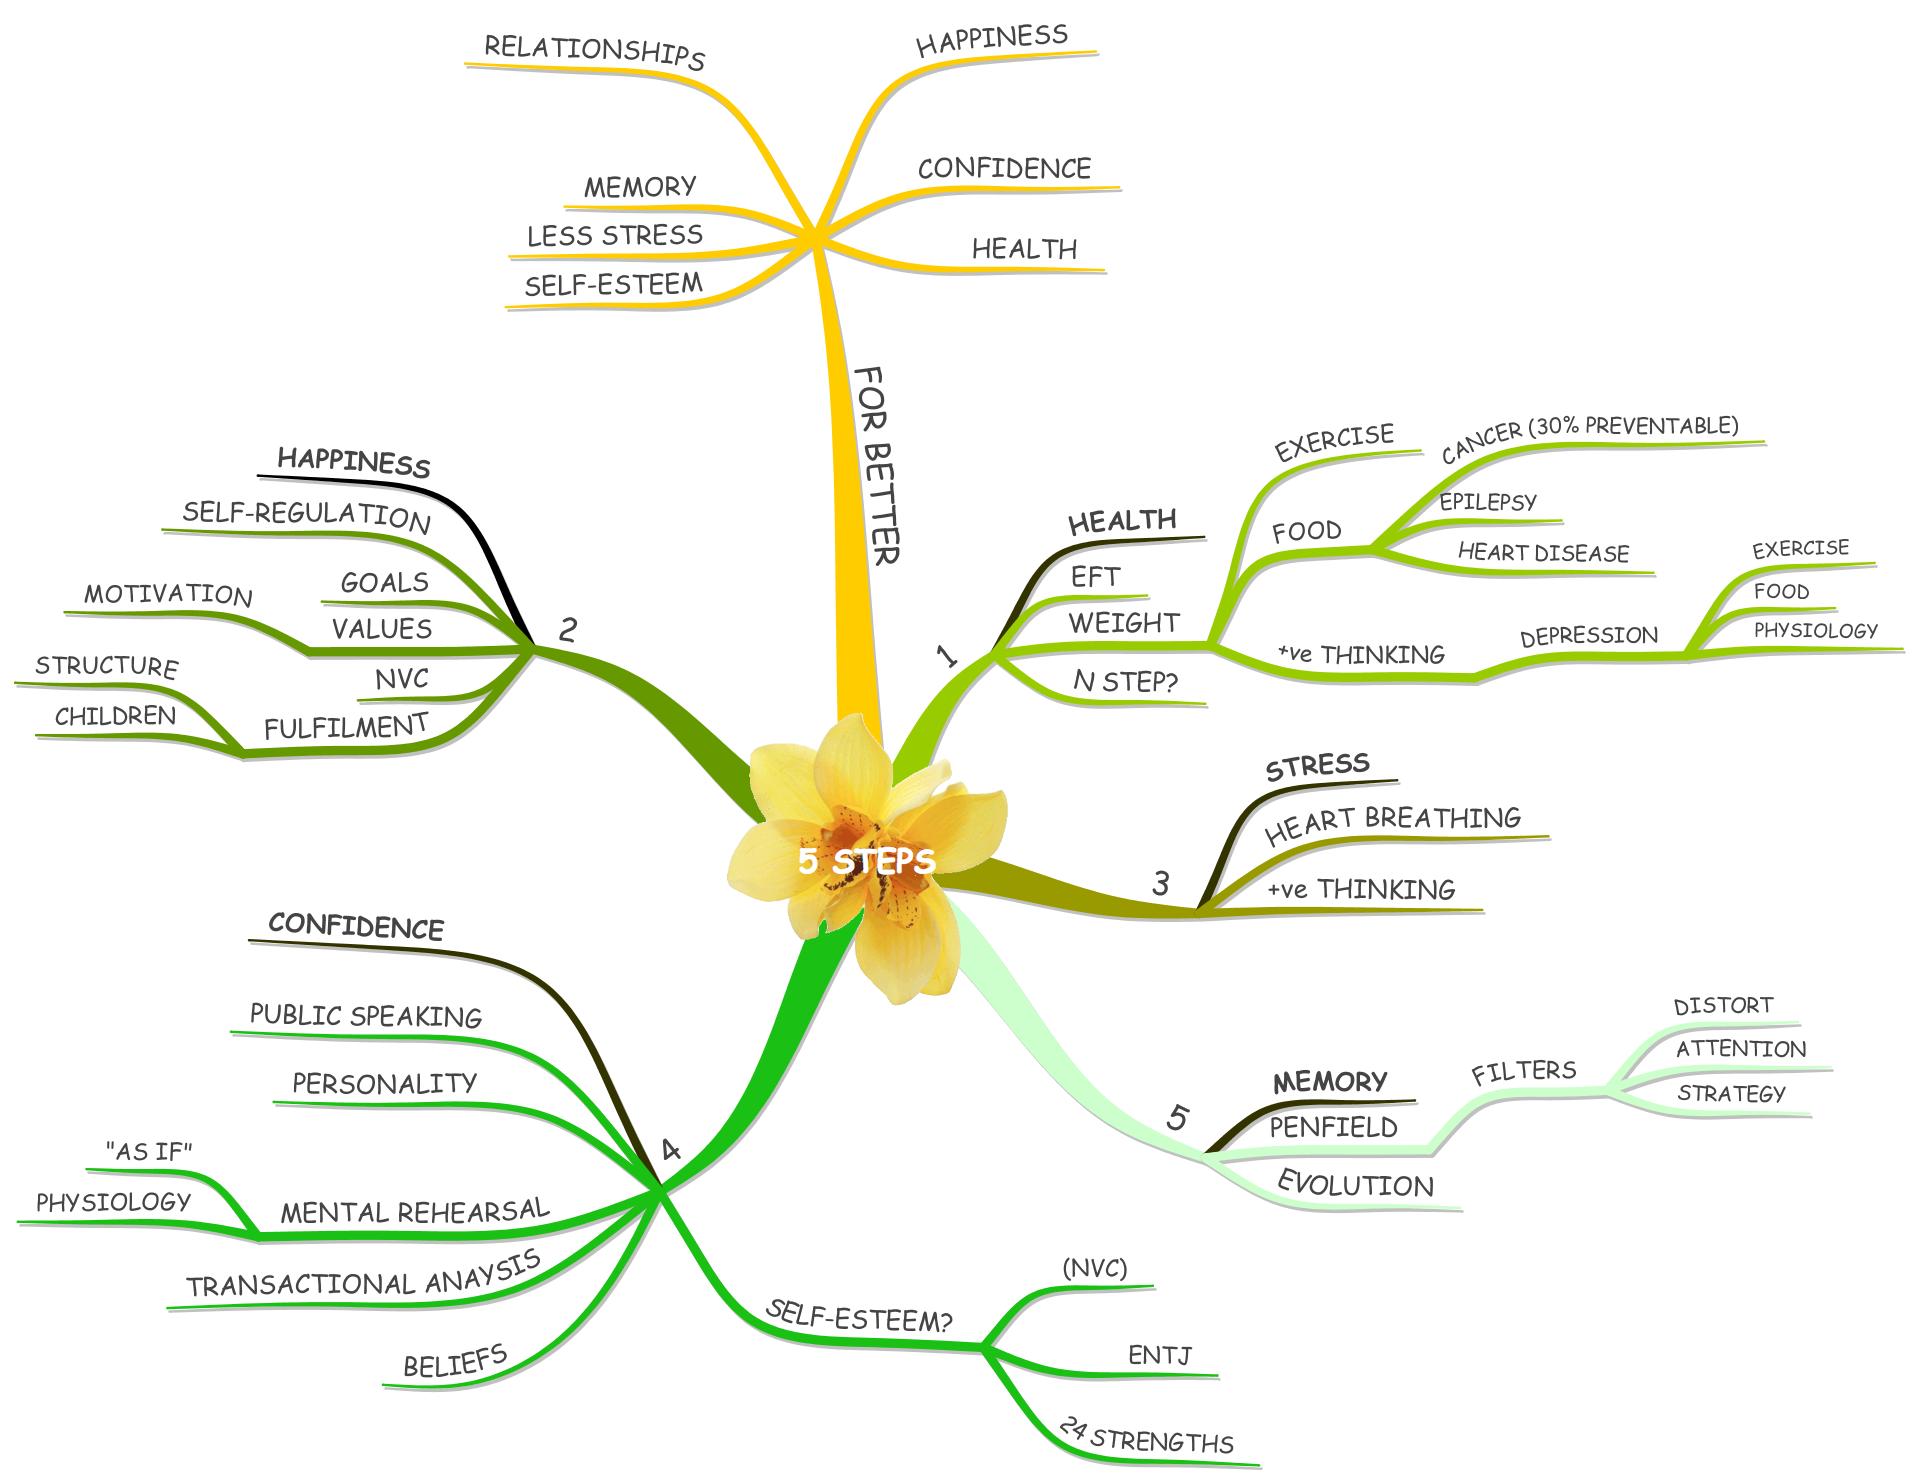 Organise yourself with MindMaps